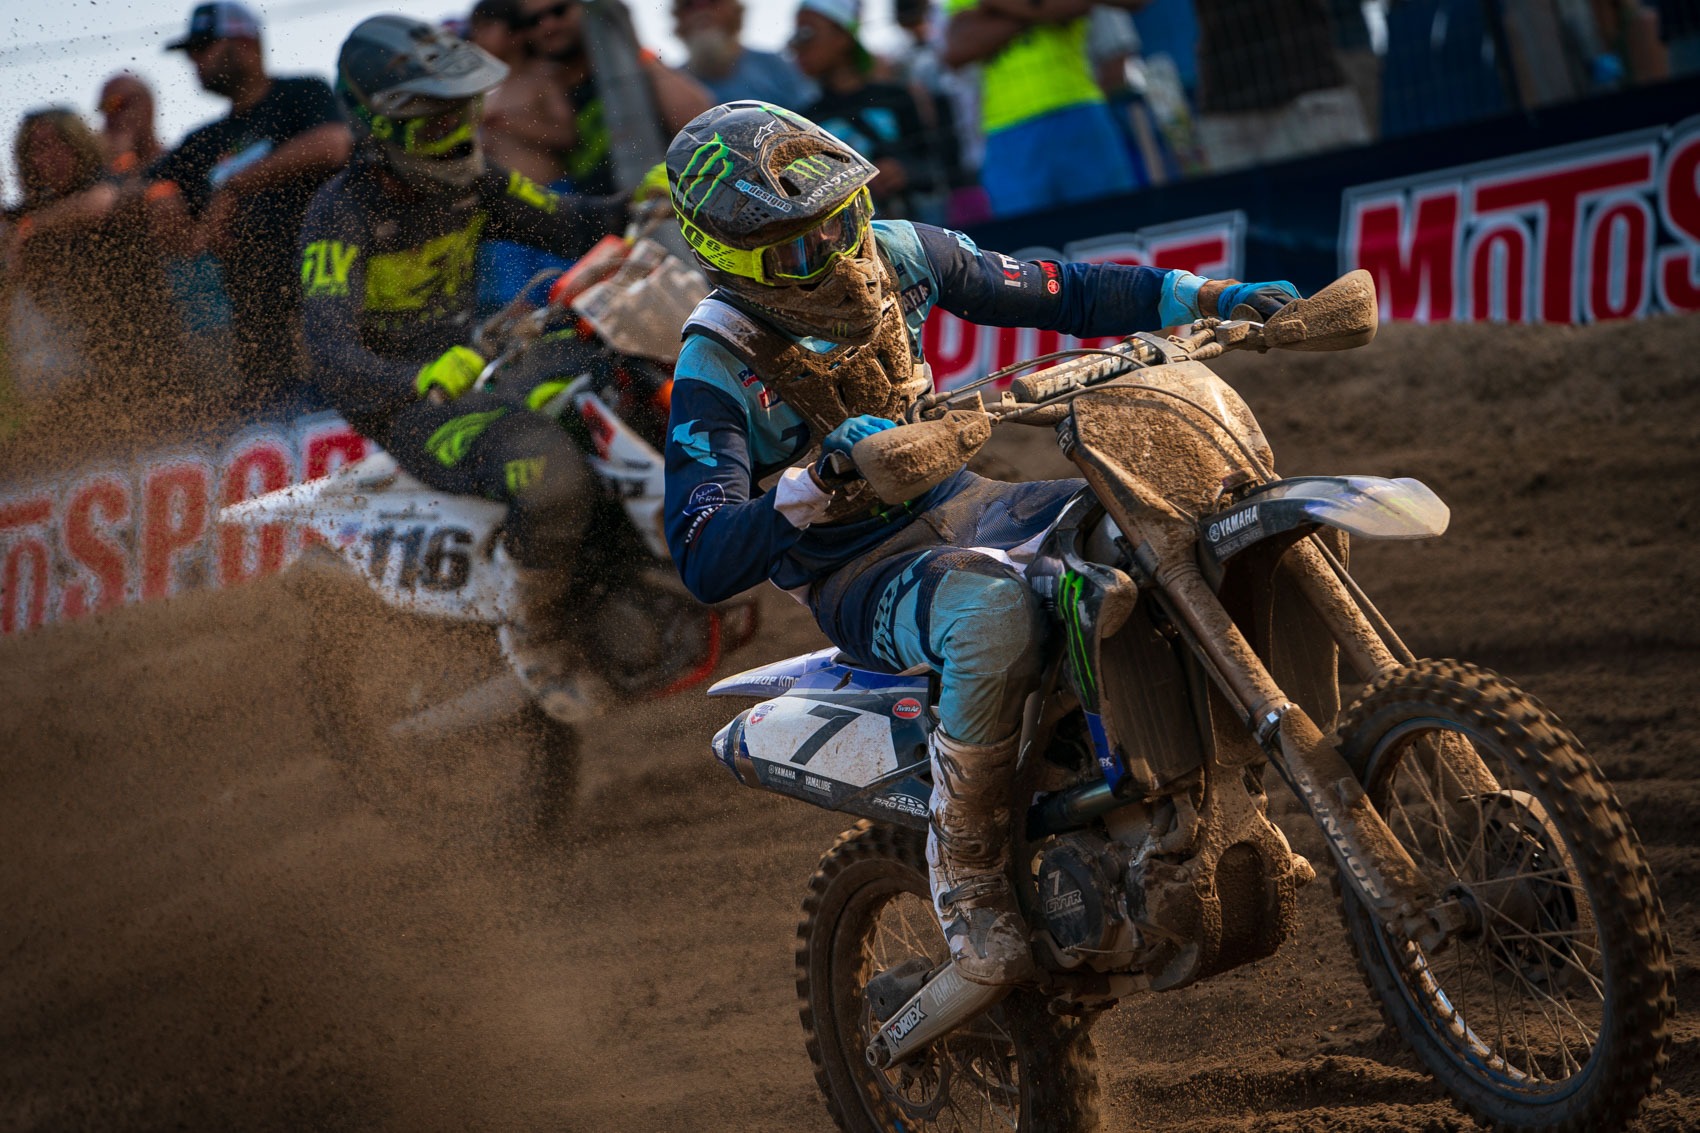 Pro Motocross Alters Anti-Doping and 450 Class Eligibility Rules Swapmoto Live